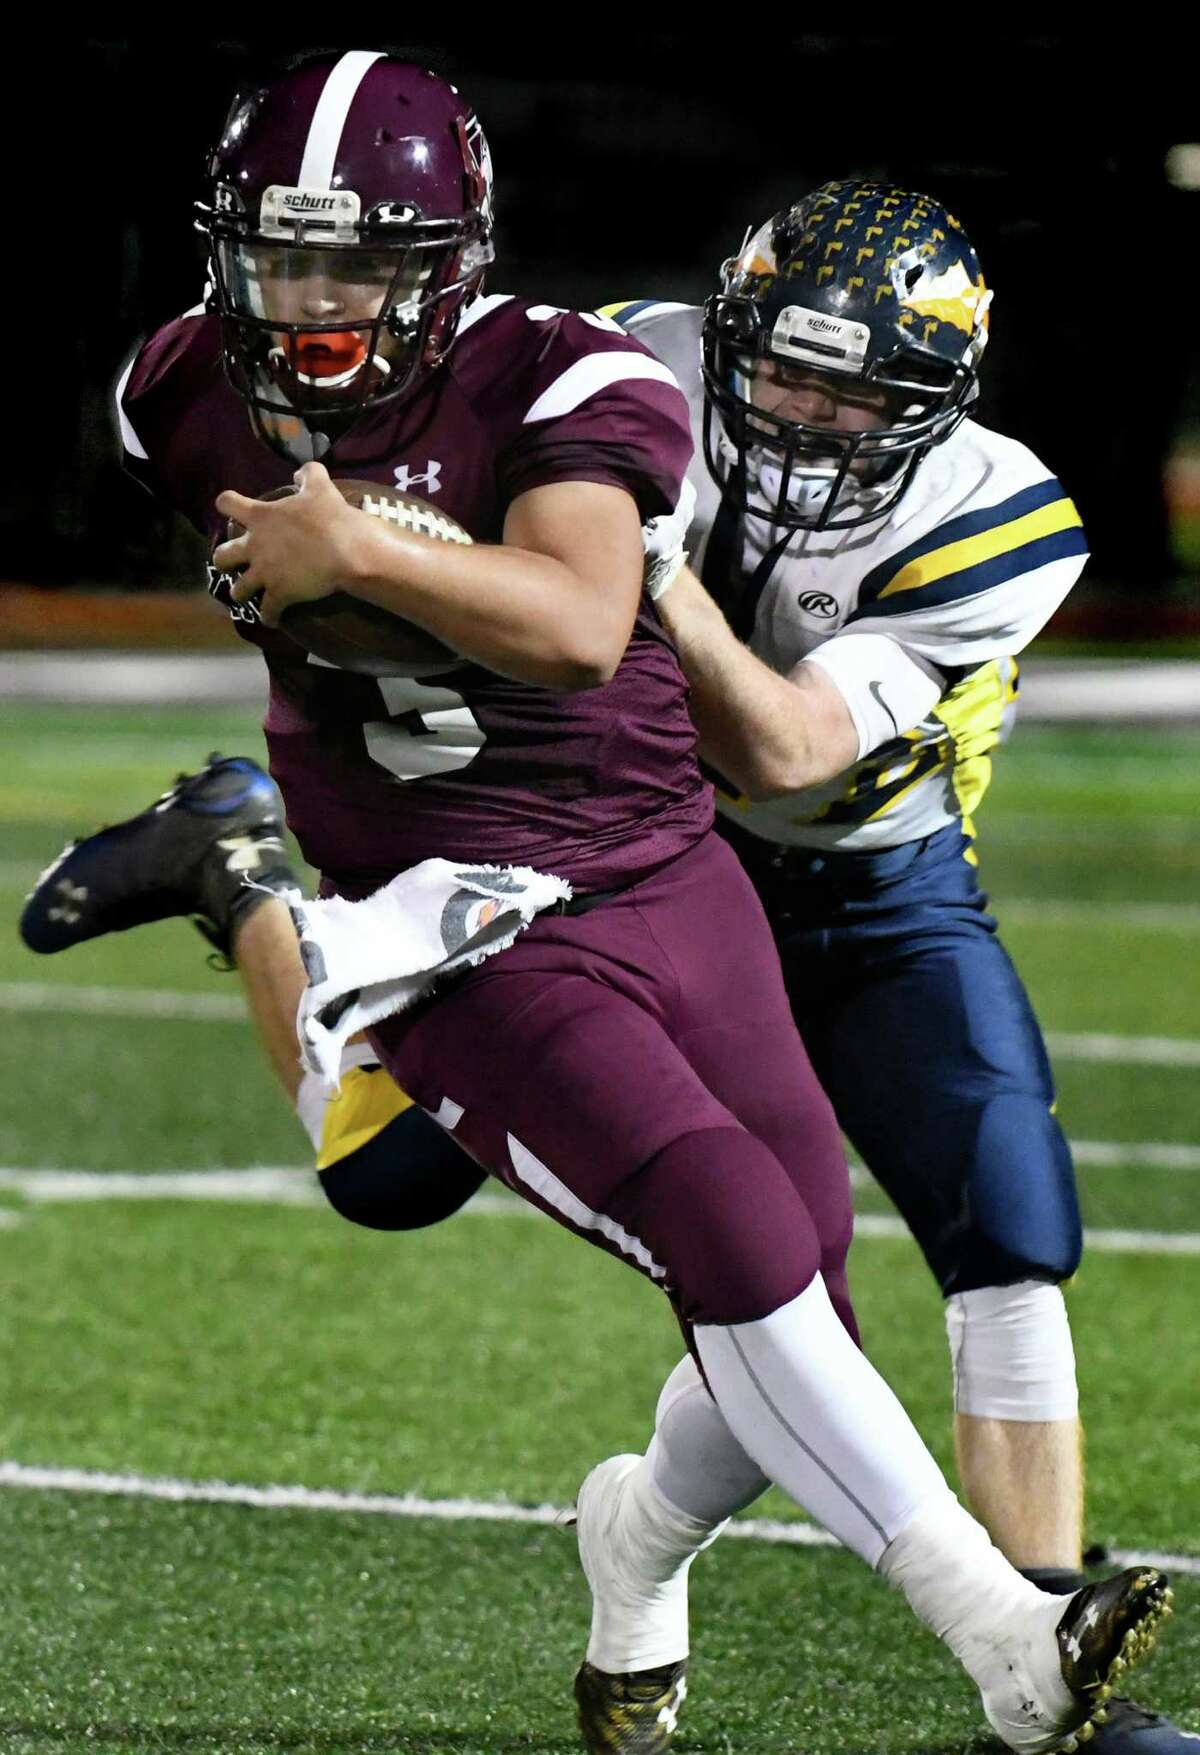 Lansingburgh's Mike Zanda, left, carries the ball as Averill Park's Dennon Fisher defends during their football game on Friday, Oct. 14, 2016, at Lansingburgh High in Troy, N.Y. (Cindy Schultz / Times Union)